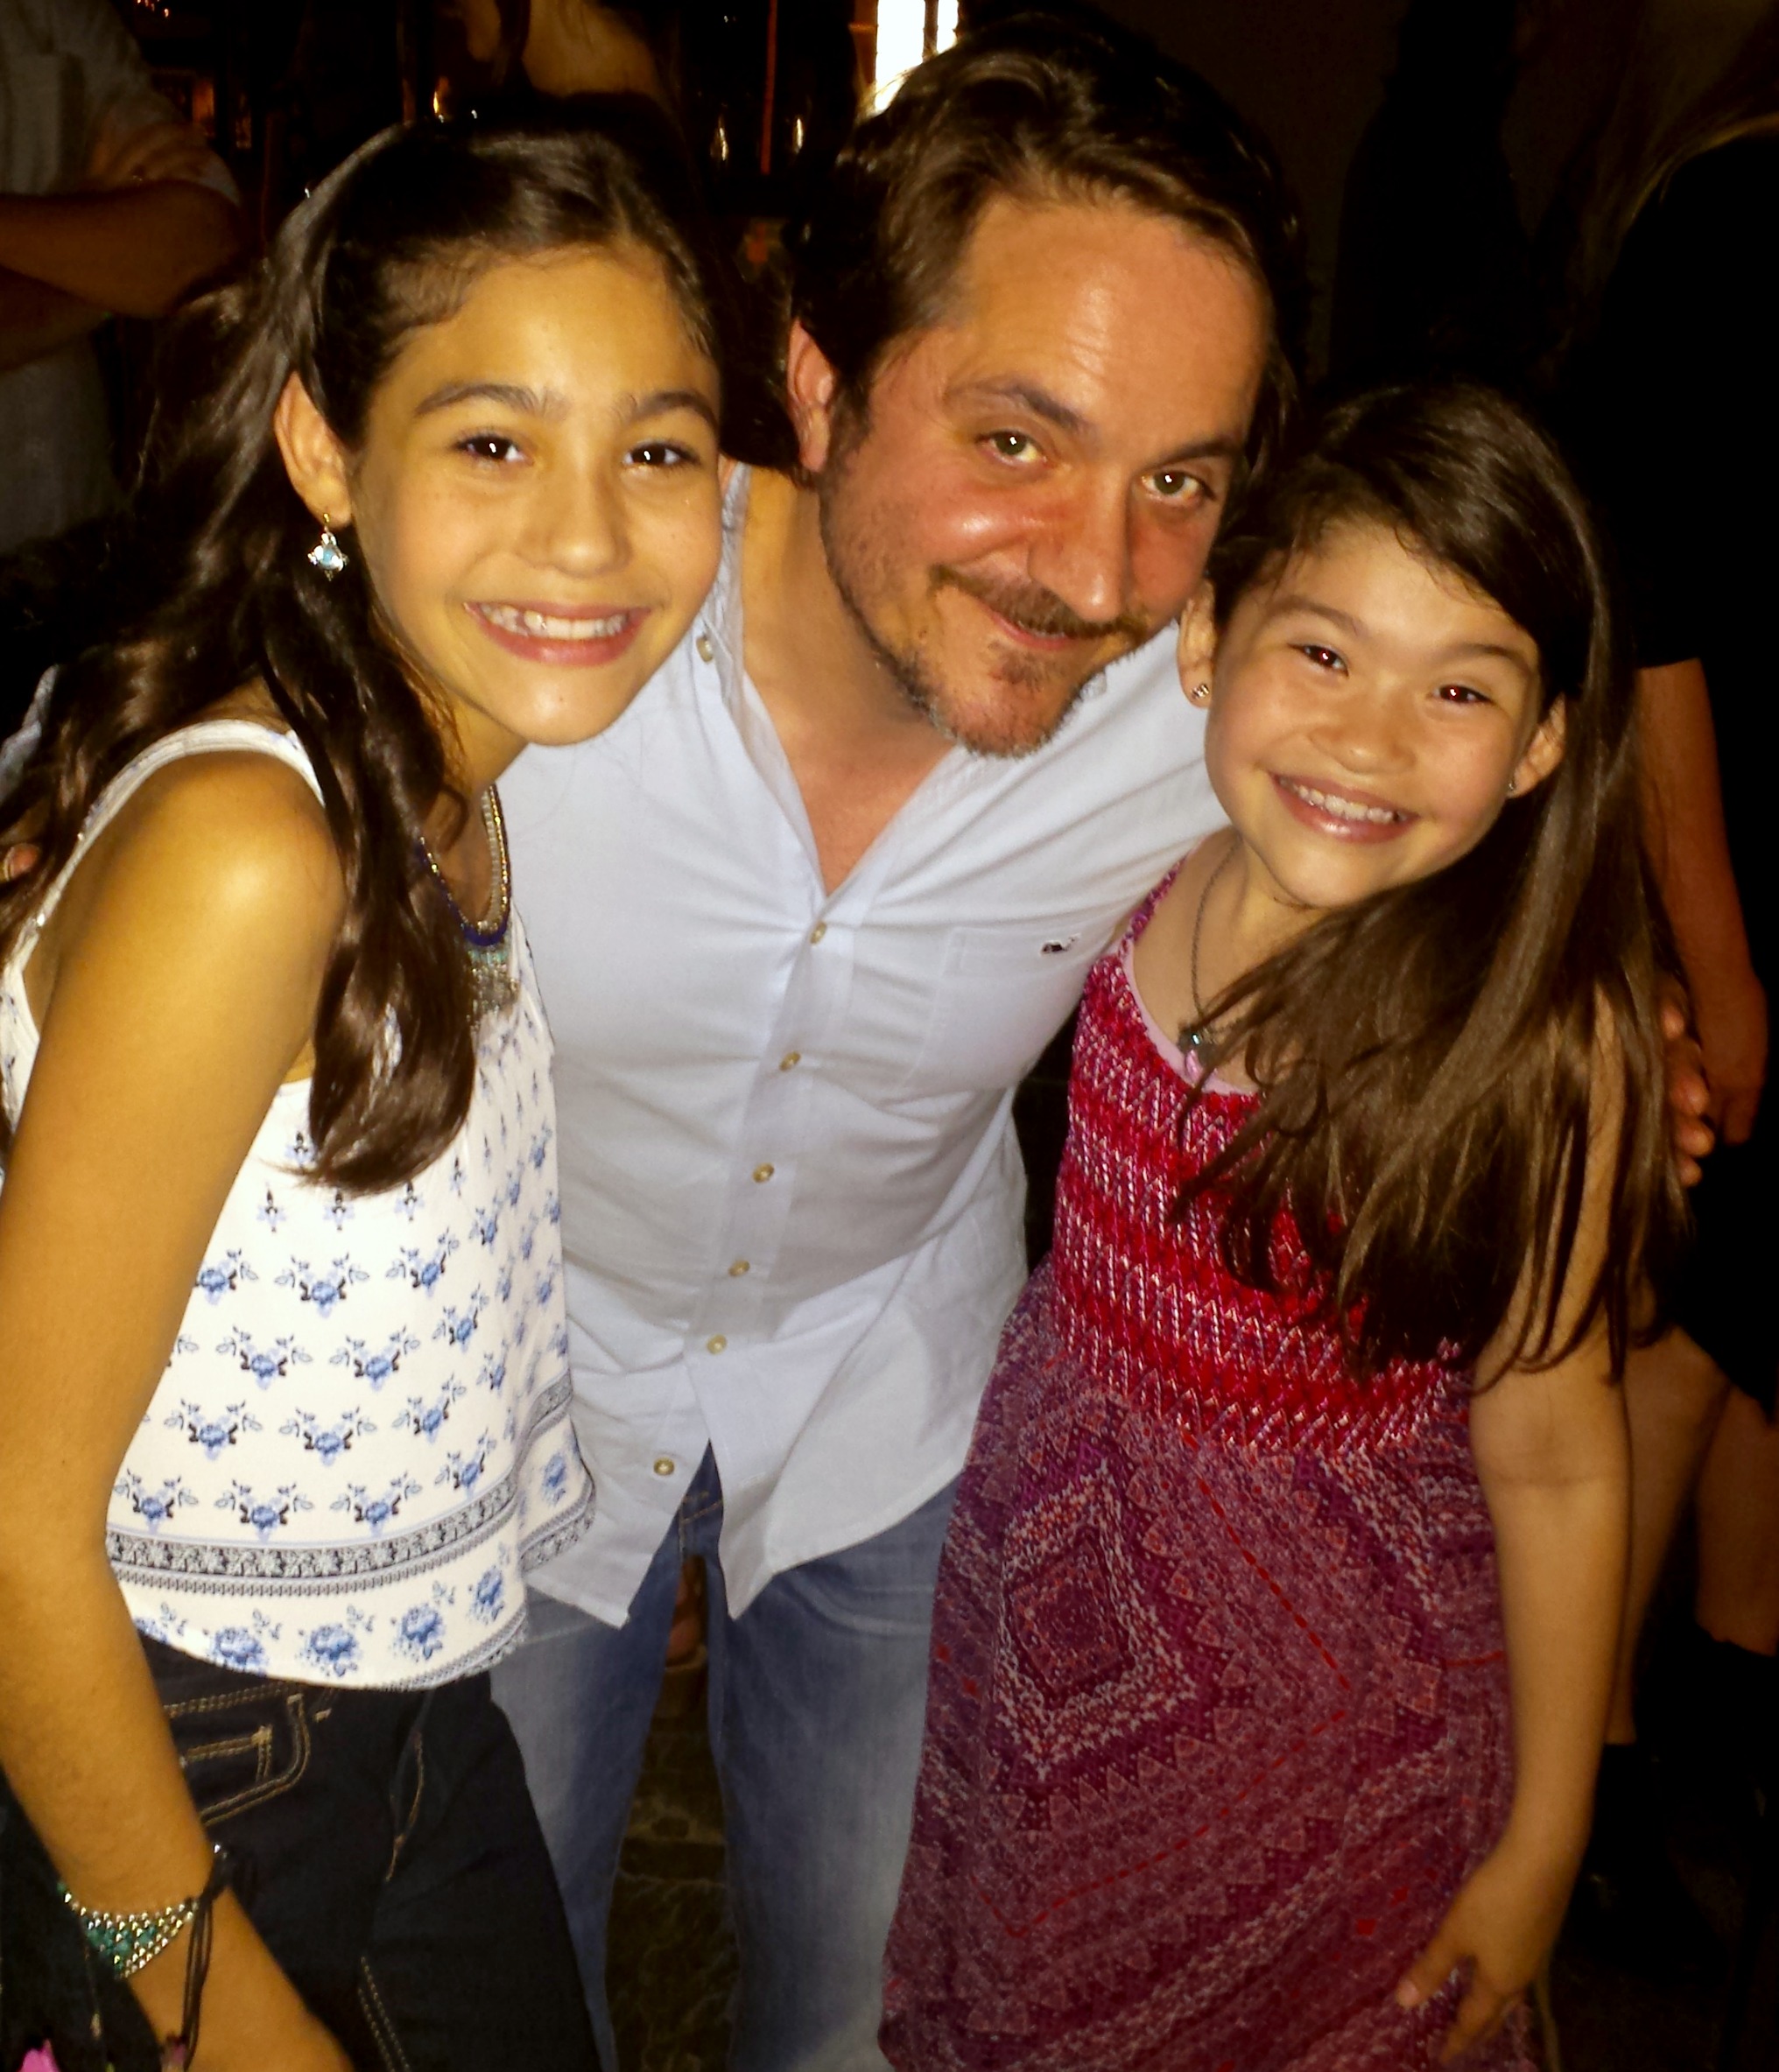 With Ben Falcone and Elise Newcomb at the Michelle Darnell wrap party.